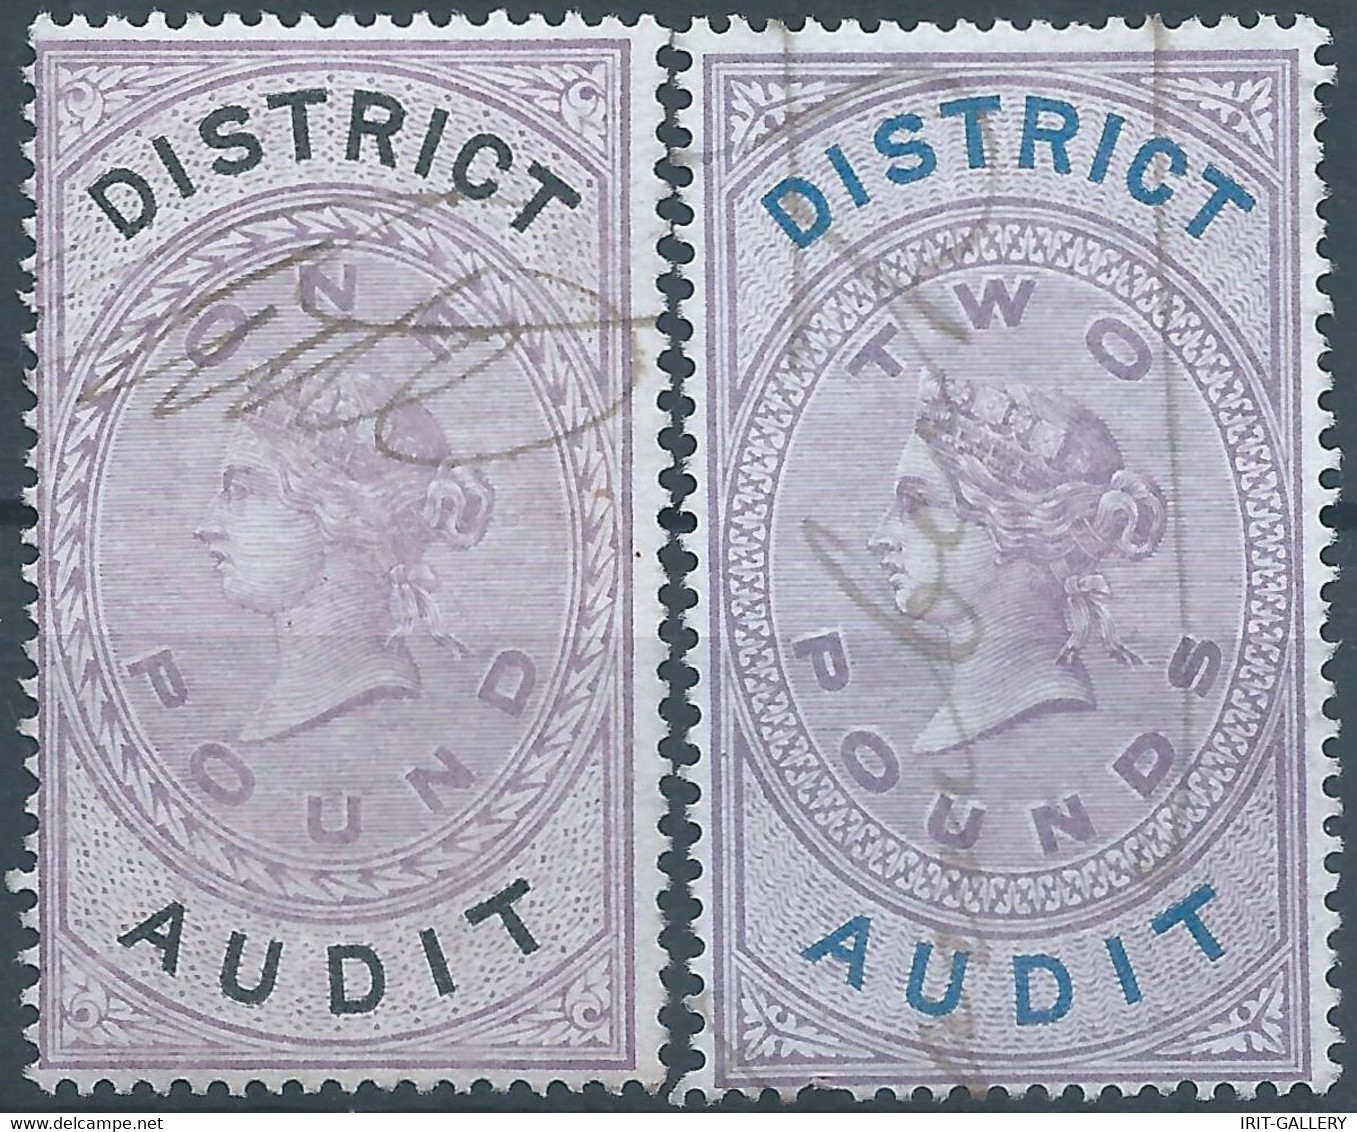 Great Britain-ENGLAND,Queen Victoria,1880-1900 Revenue Stamp Tax Fisca DISTRICT AUDIT,1&2 Pounds,Used - Fiscaux